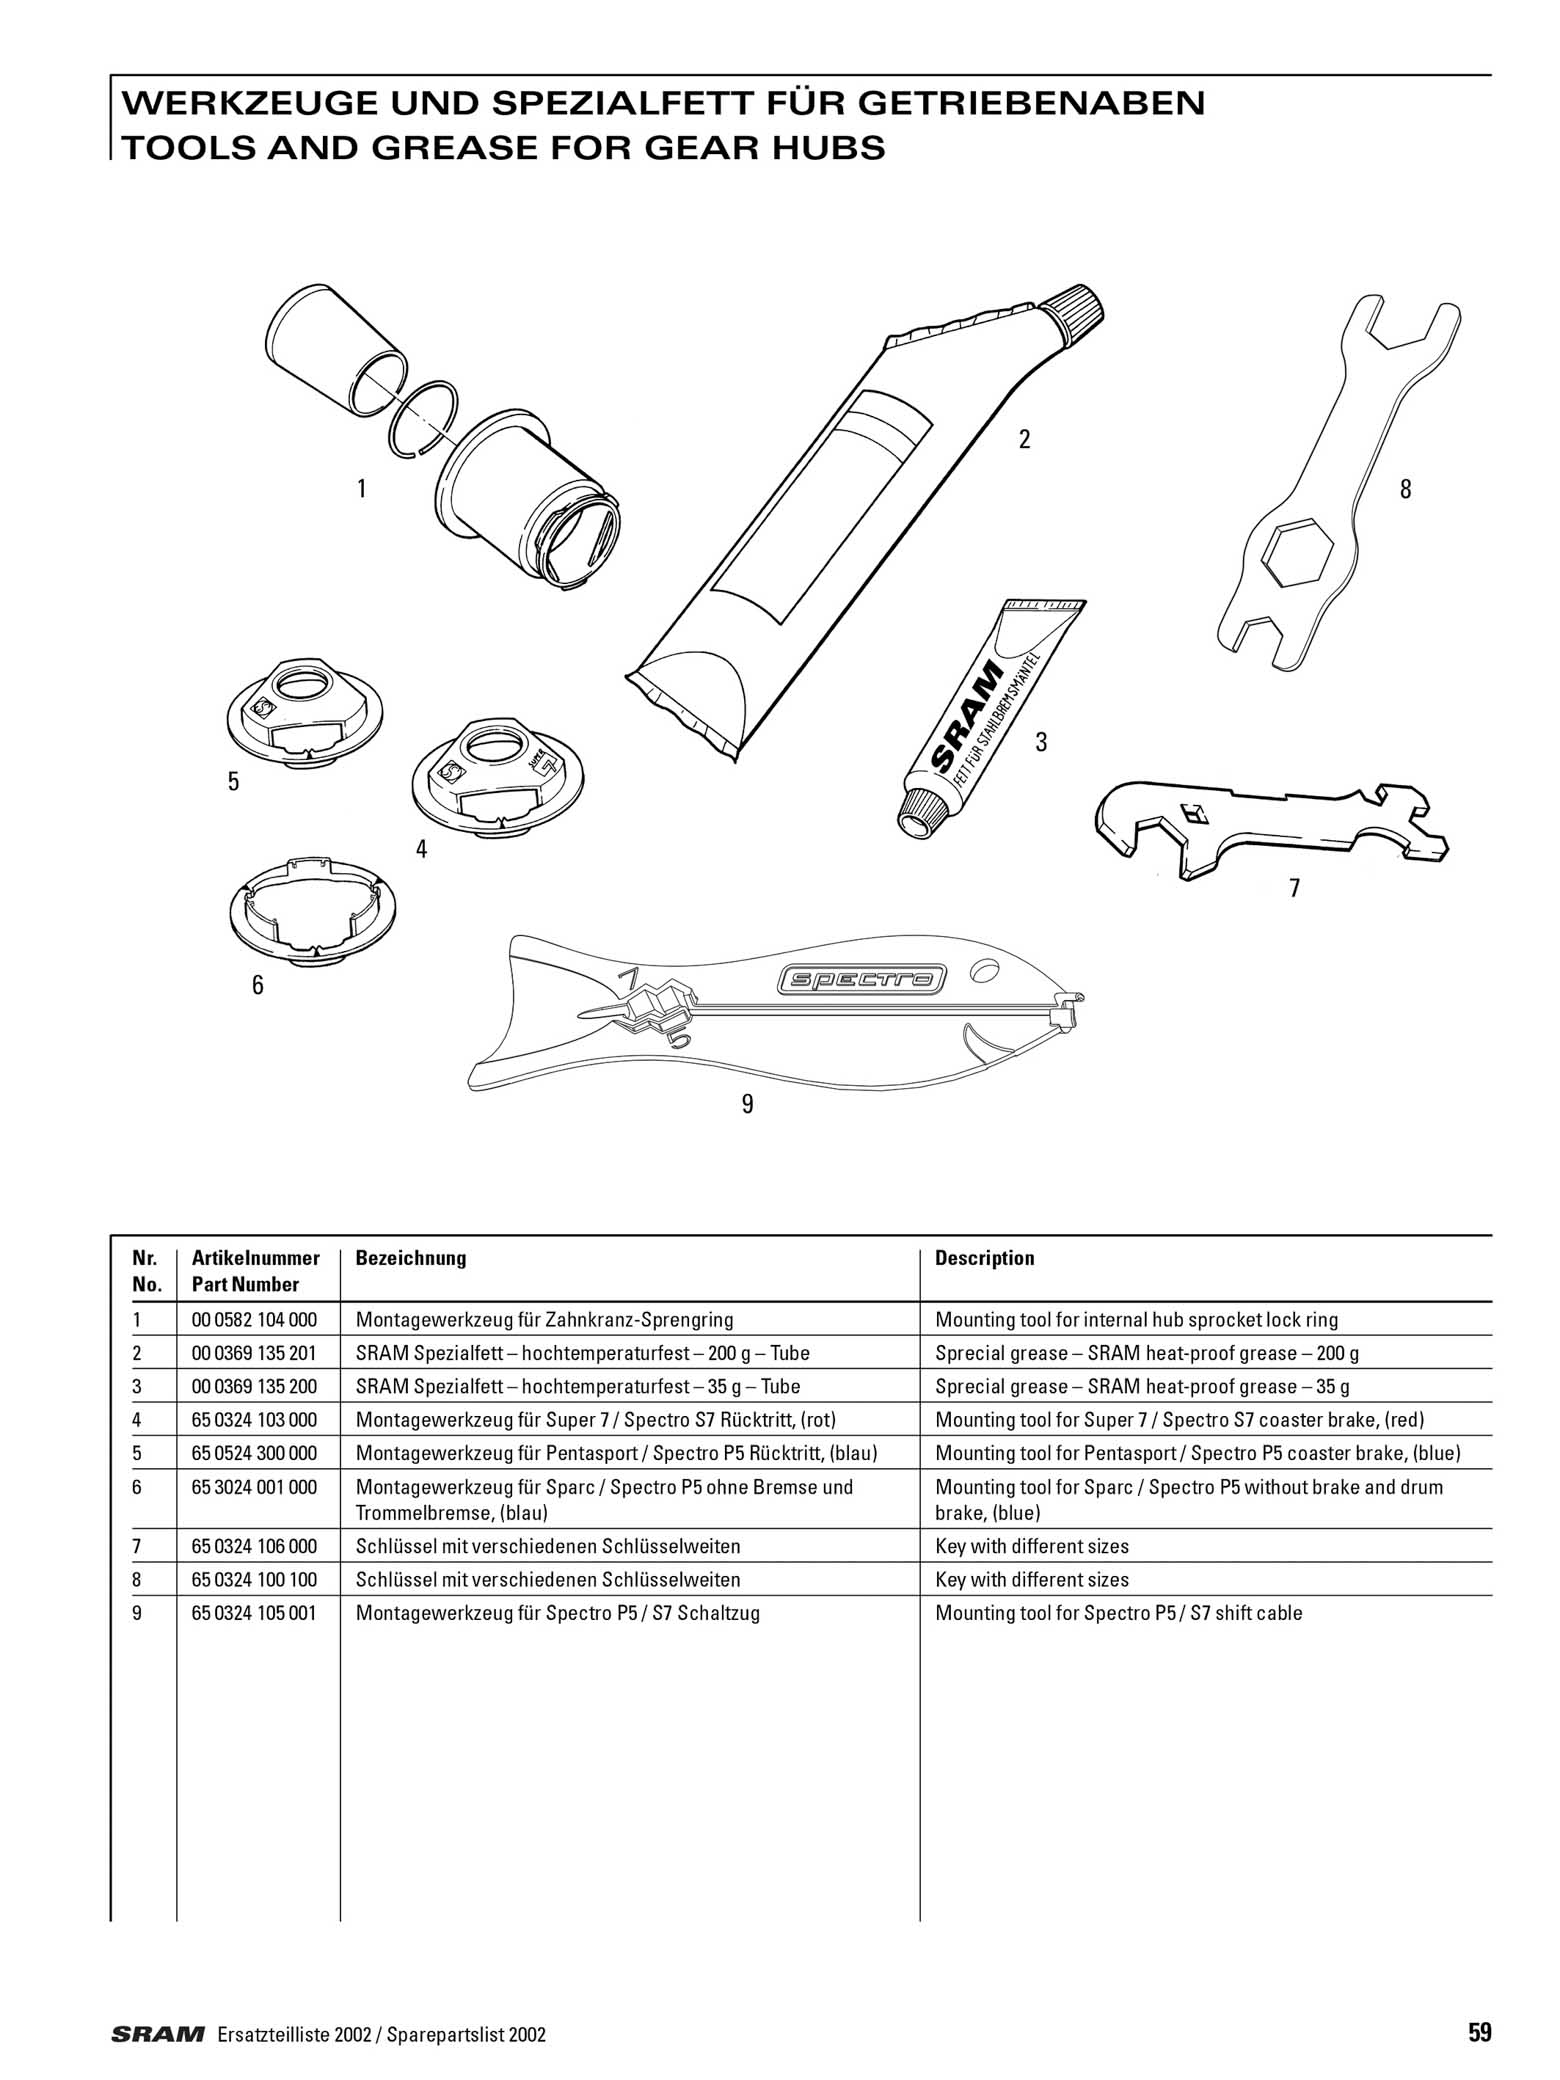 SRAM - Spare Parts List 2002 page 059 main image